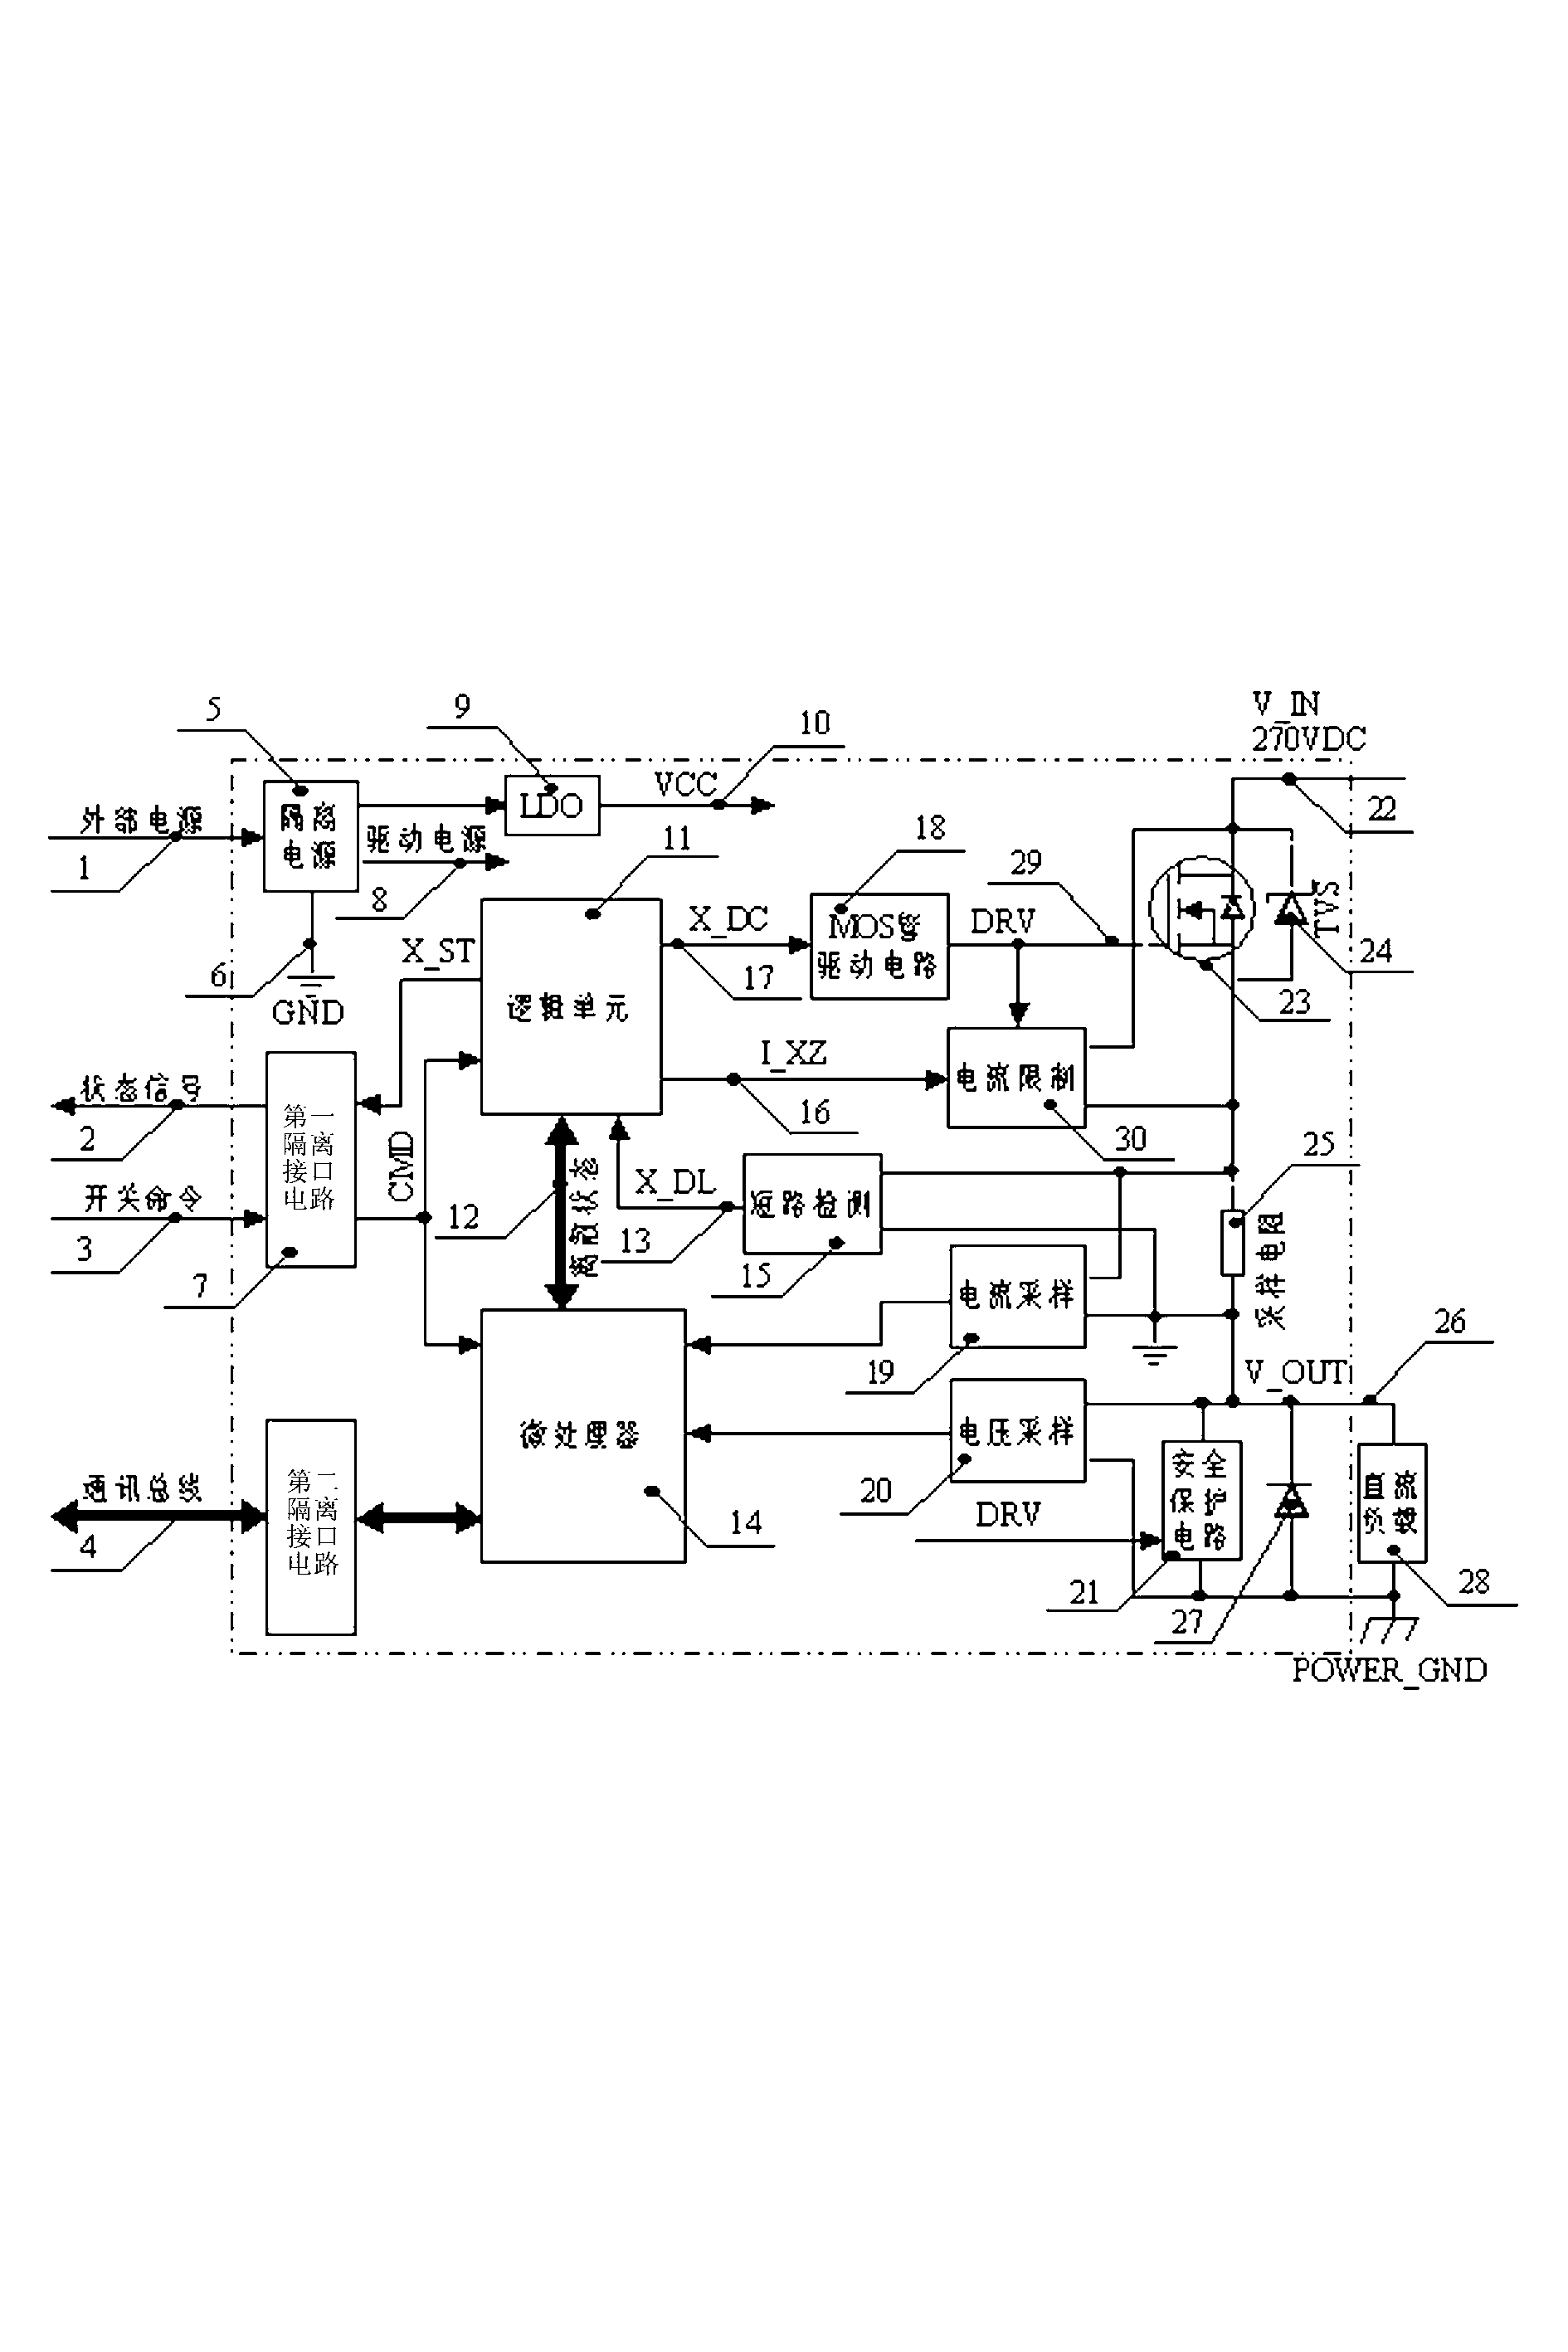 High-voltage direct current solid state power controller